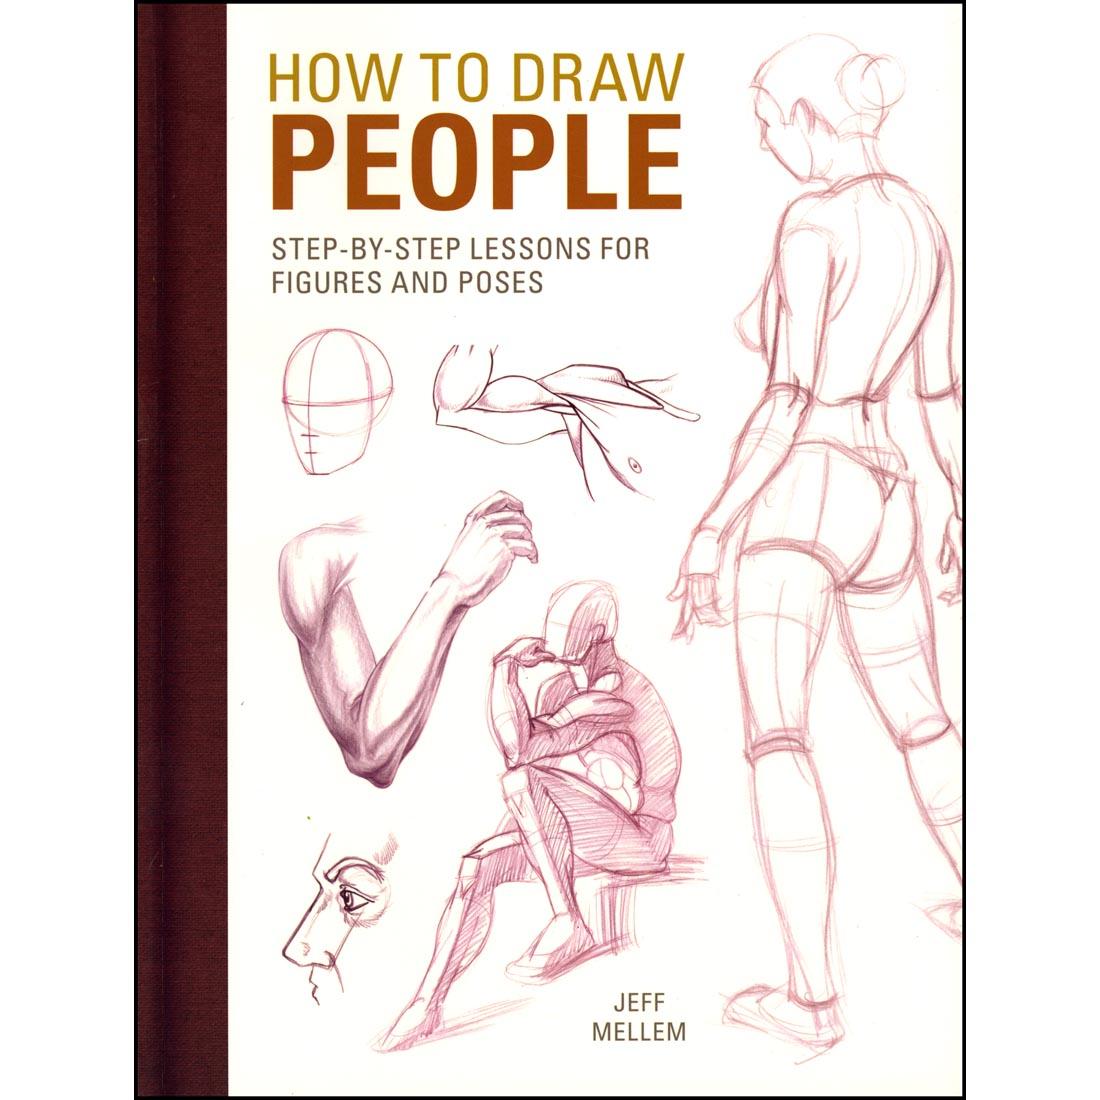 cover of book - How To Draw People